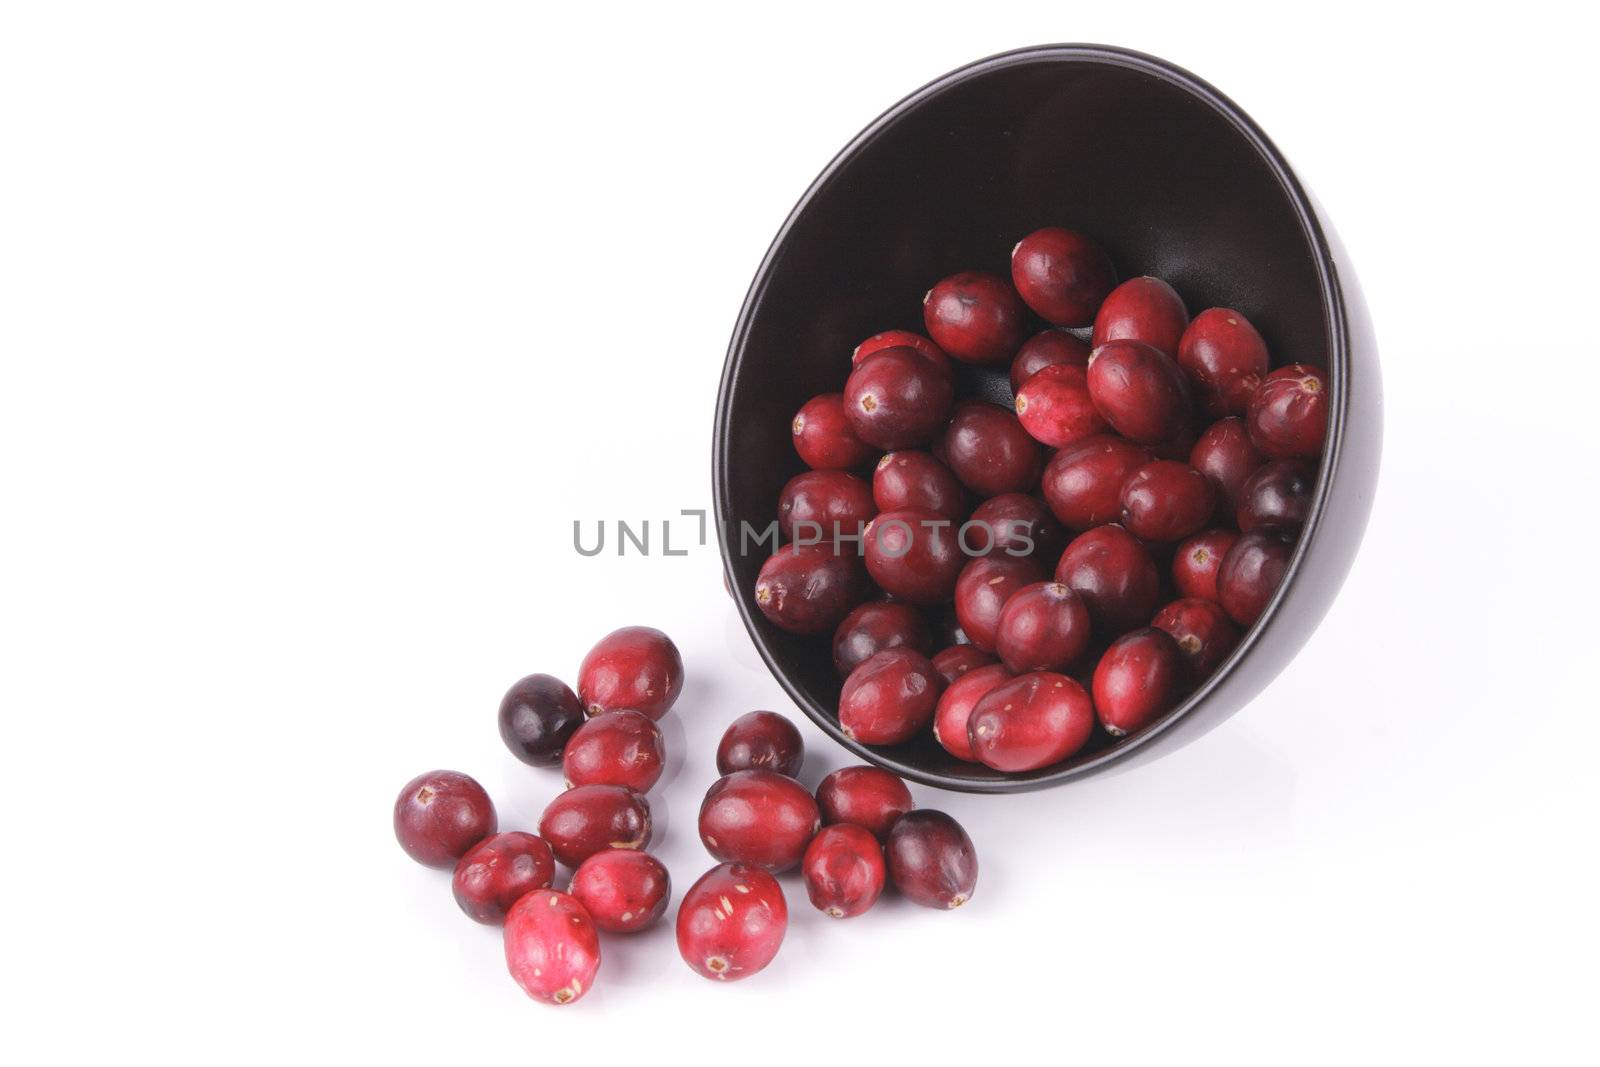 Red ripe cranberries spilling out of a small round black bowl on its side with a reflective white background